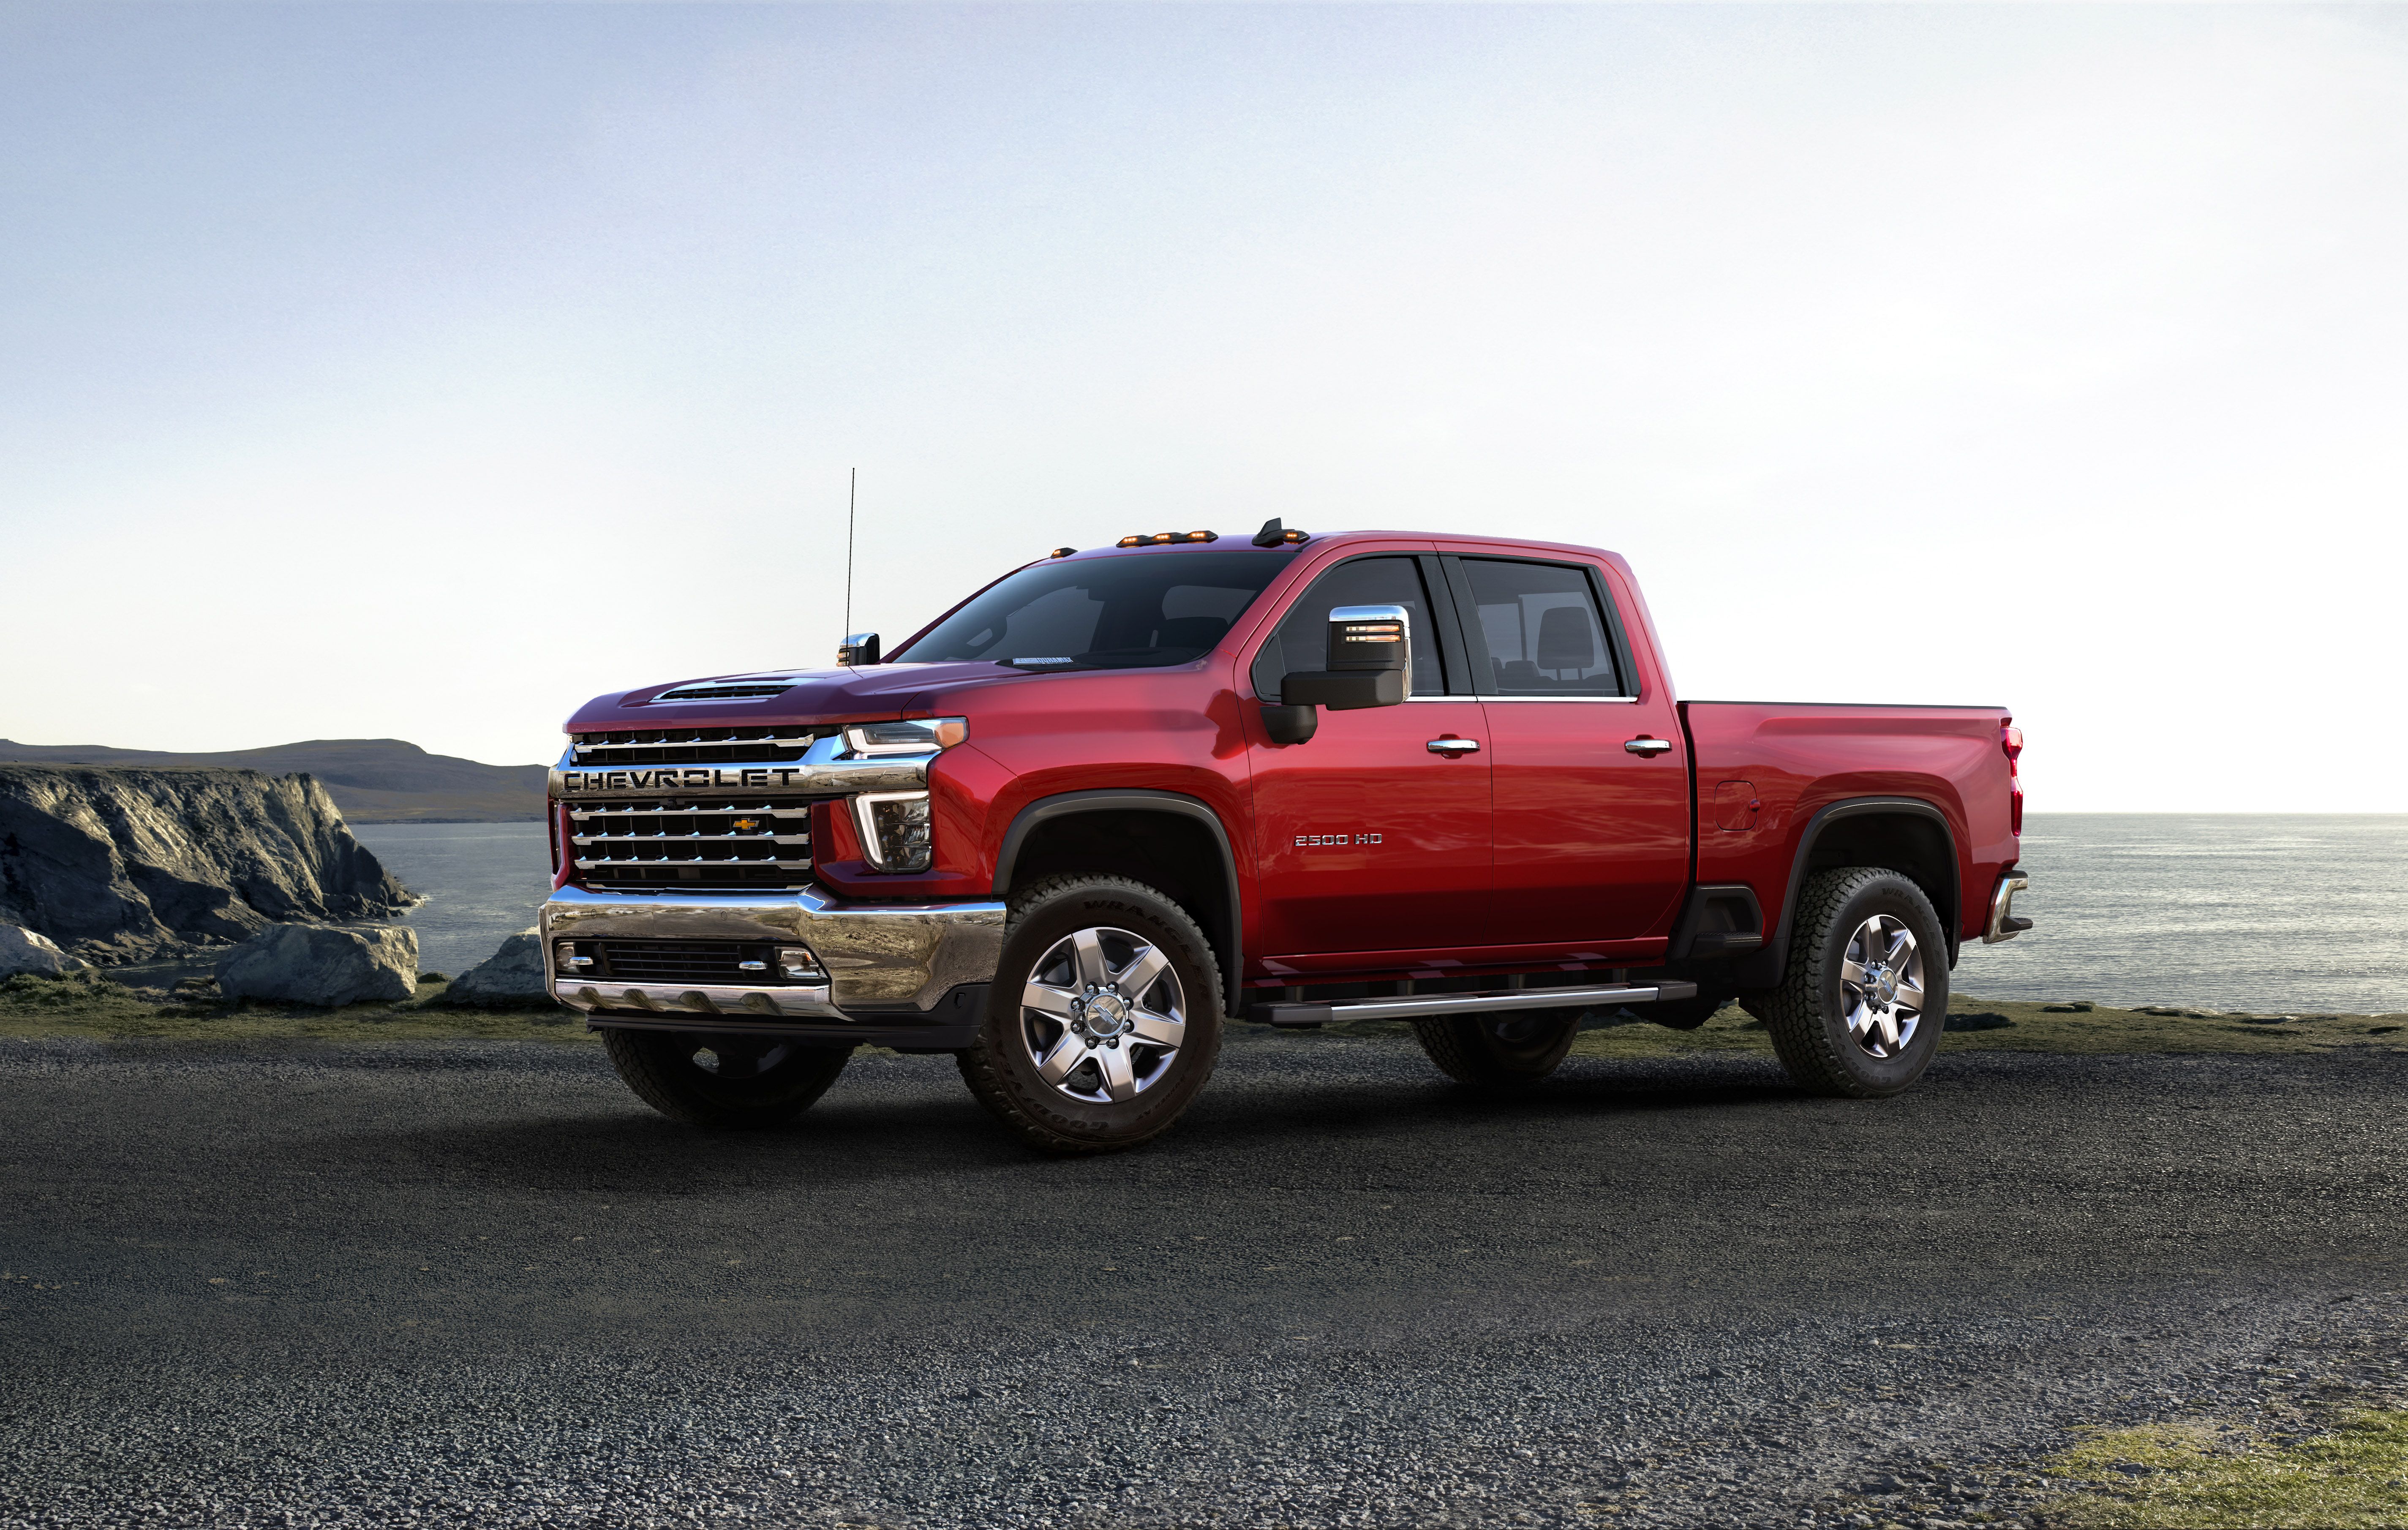 Chevy Silverado HD Debuts With New Engine, Massive Towing Rating Picture, Photo, Wallpaper